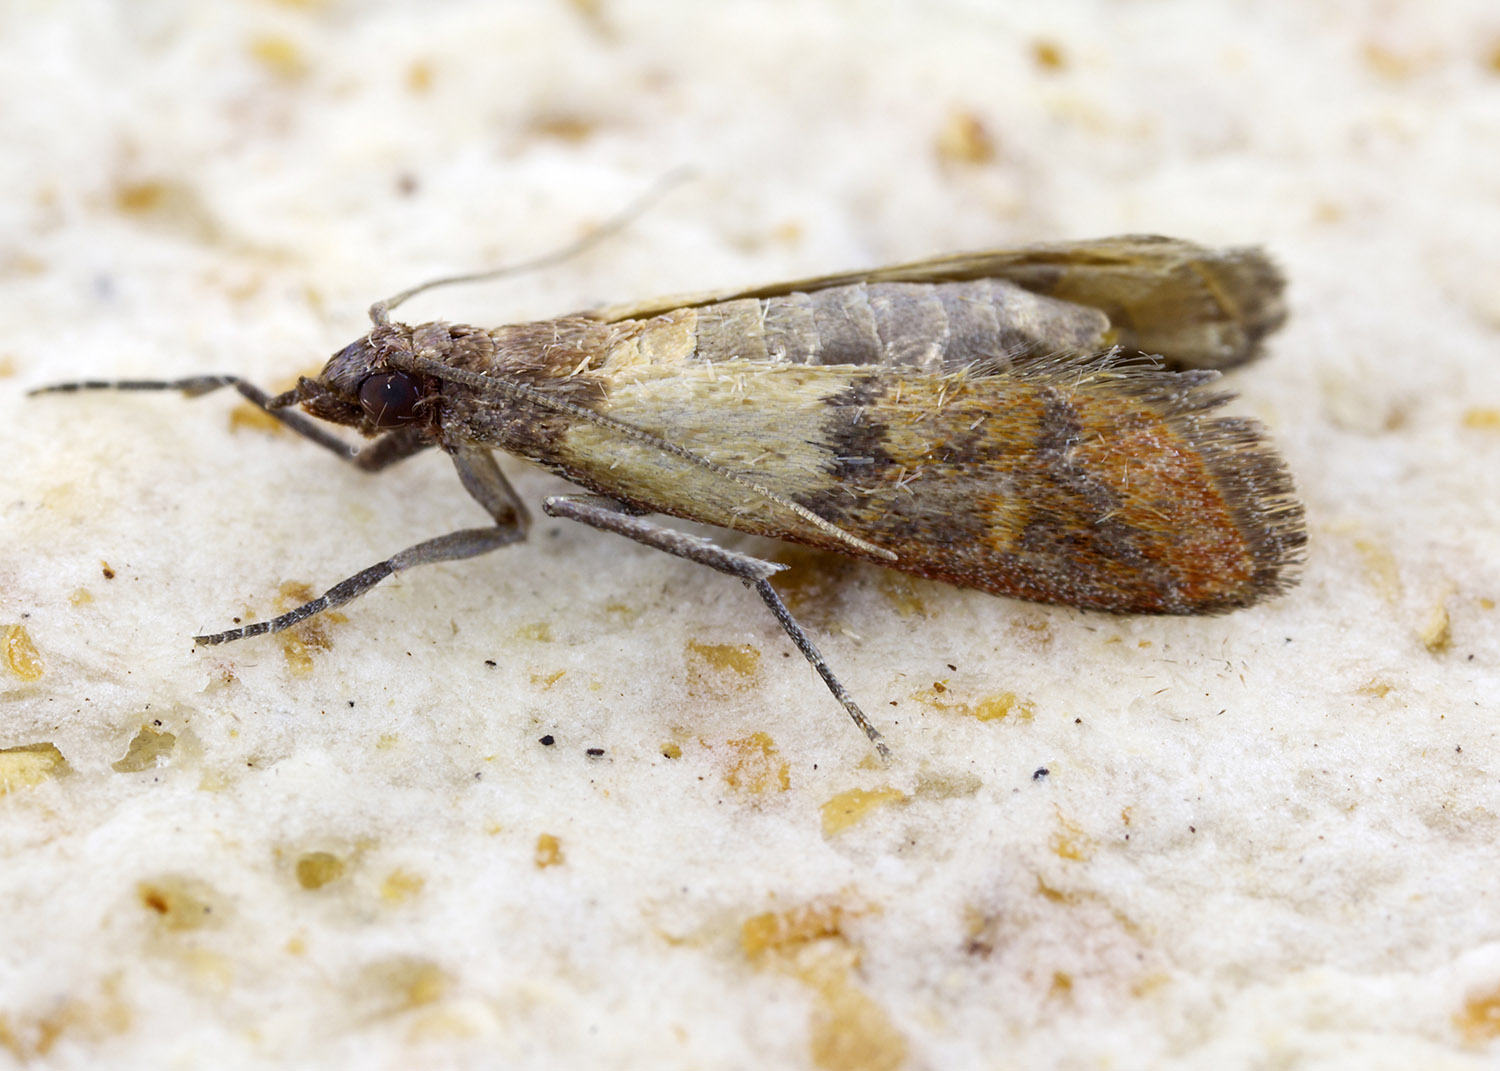 The Indianmeal moth (Plodia interpunctella), also spelled as Indian meal moth and Indian-meal moth, is a pyraloid moth of the family Pyralidae. Alternative common names are weevil moth, pantry moth, flour moth or grain moth. The almond moth (Cadra cautella) and the raisin moth (Cadra figulilella) are commonly confused with the Indian-meal moth due to similar food sources and appearance. The species was named after being noted for feeding on Indian-meal or cornmeal and it does not occur natively in India as the aberrant usage of Indian meal moth would suggest. It is also not to be confused with the Mediterranean flour moth (Ephestia kuehniella), another common pest of stored grains.